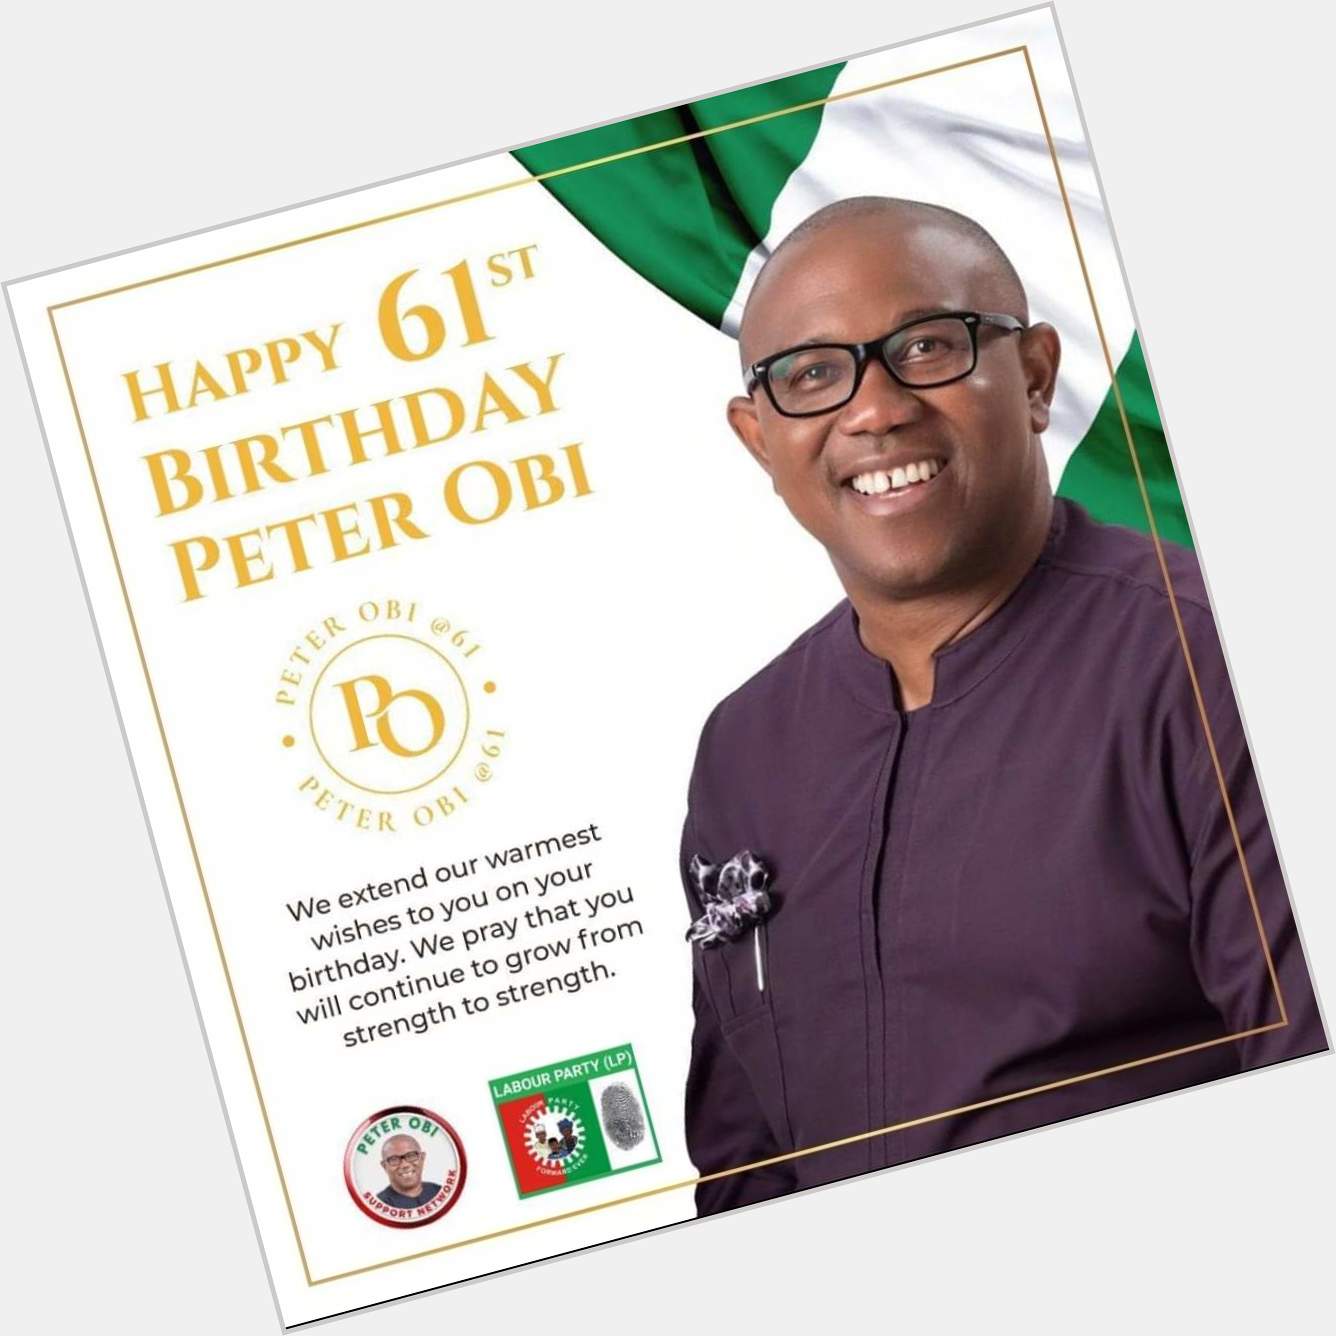 HAPPY BIRTHDAY OUR NEXT PRESIDENT!!!
Happy birthday our great leader!!!! WE LOVE YOU SIR..... PETER OBI ALL THE WAY 